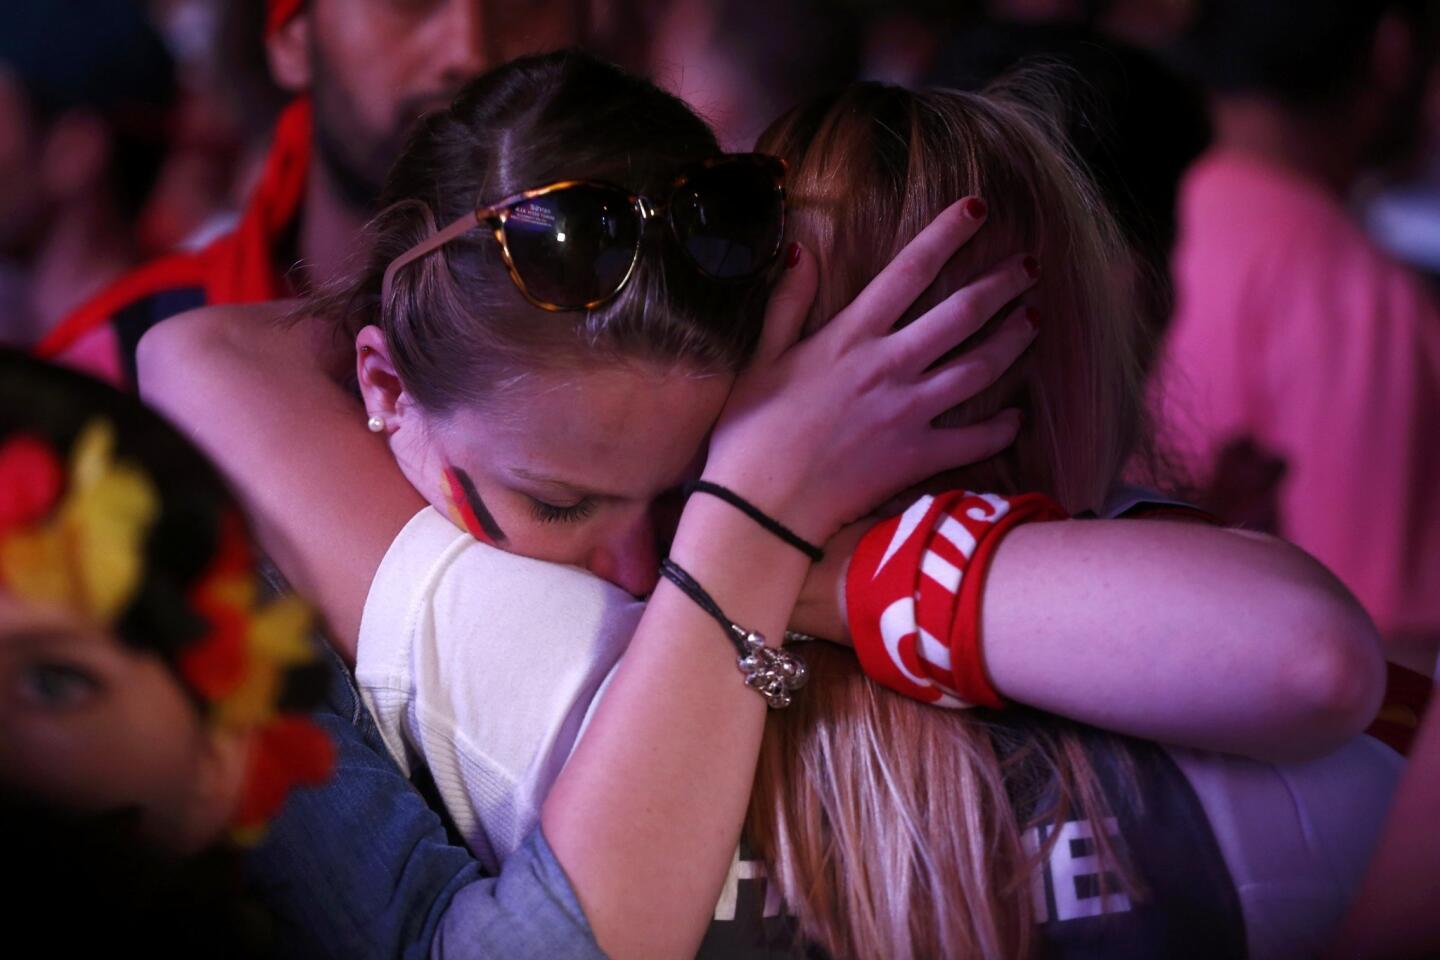 Fans of Germany react after the Euro 2016 match between France and Germany at a public screening in Berlin